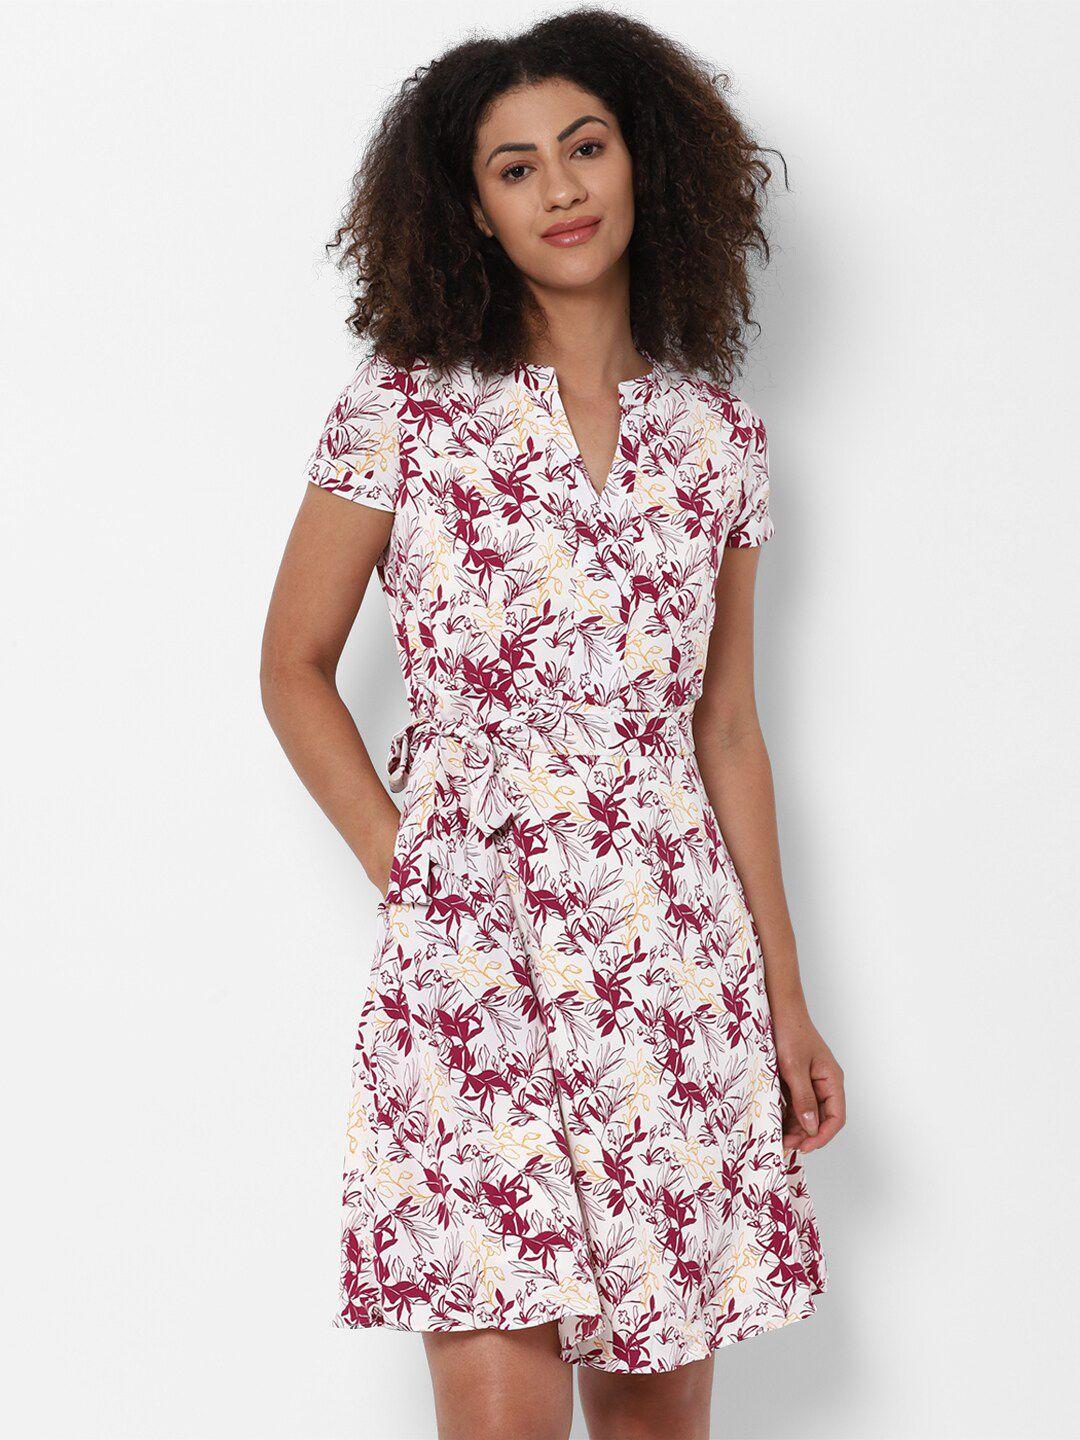 allen-solly-woman-white-&-maroon-floral-printed-dress